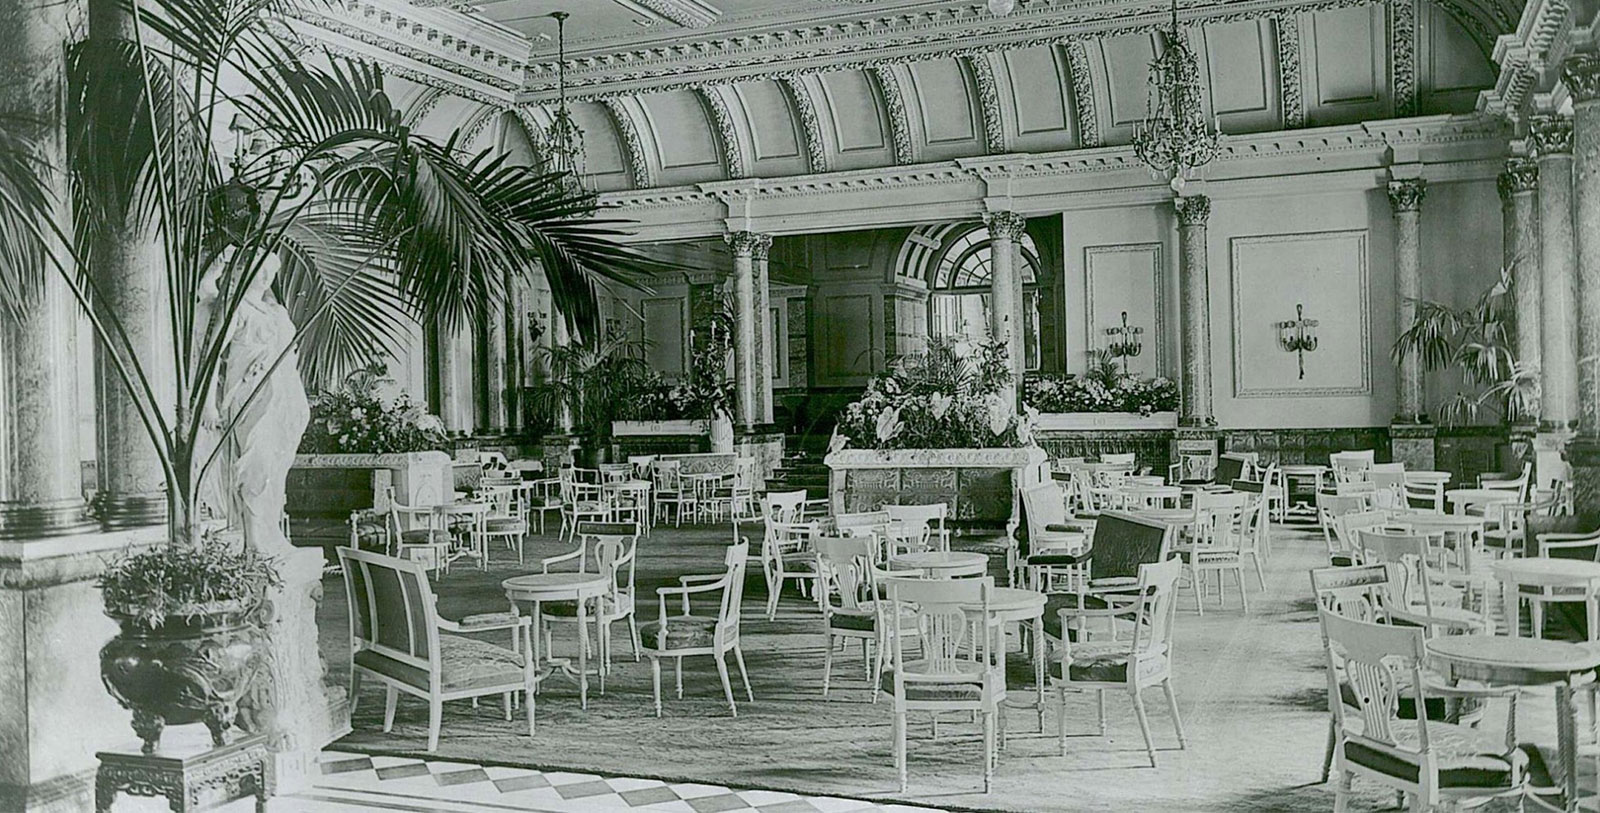 Historic Image of the Thames Foyer at The Savoy London, 1889, Member of Historic Hotels Worldwide, in London, England, United Kingdom, Discover